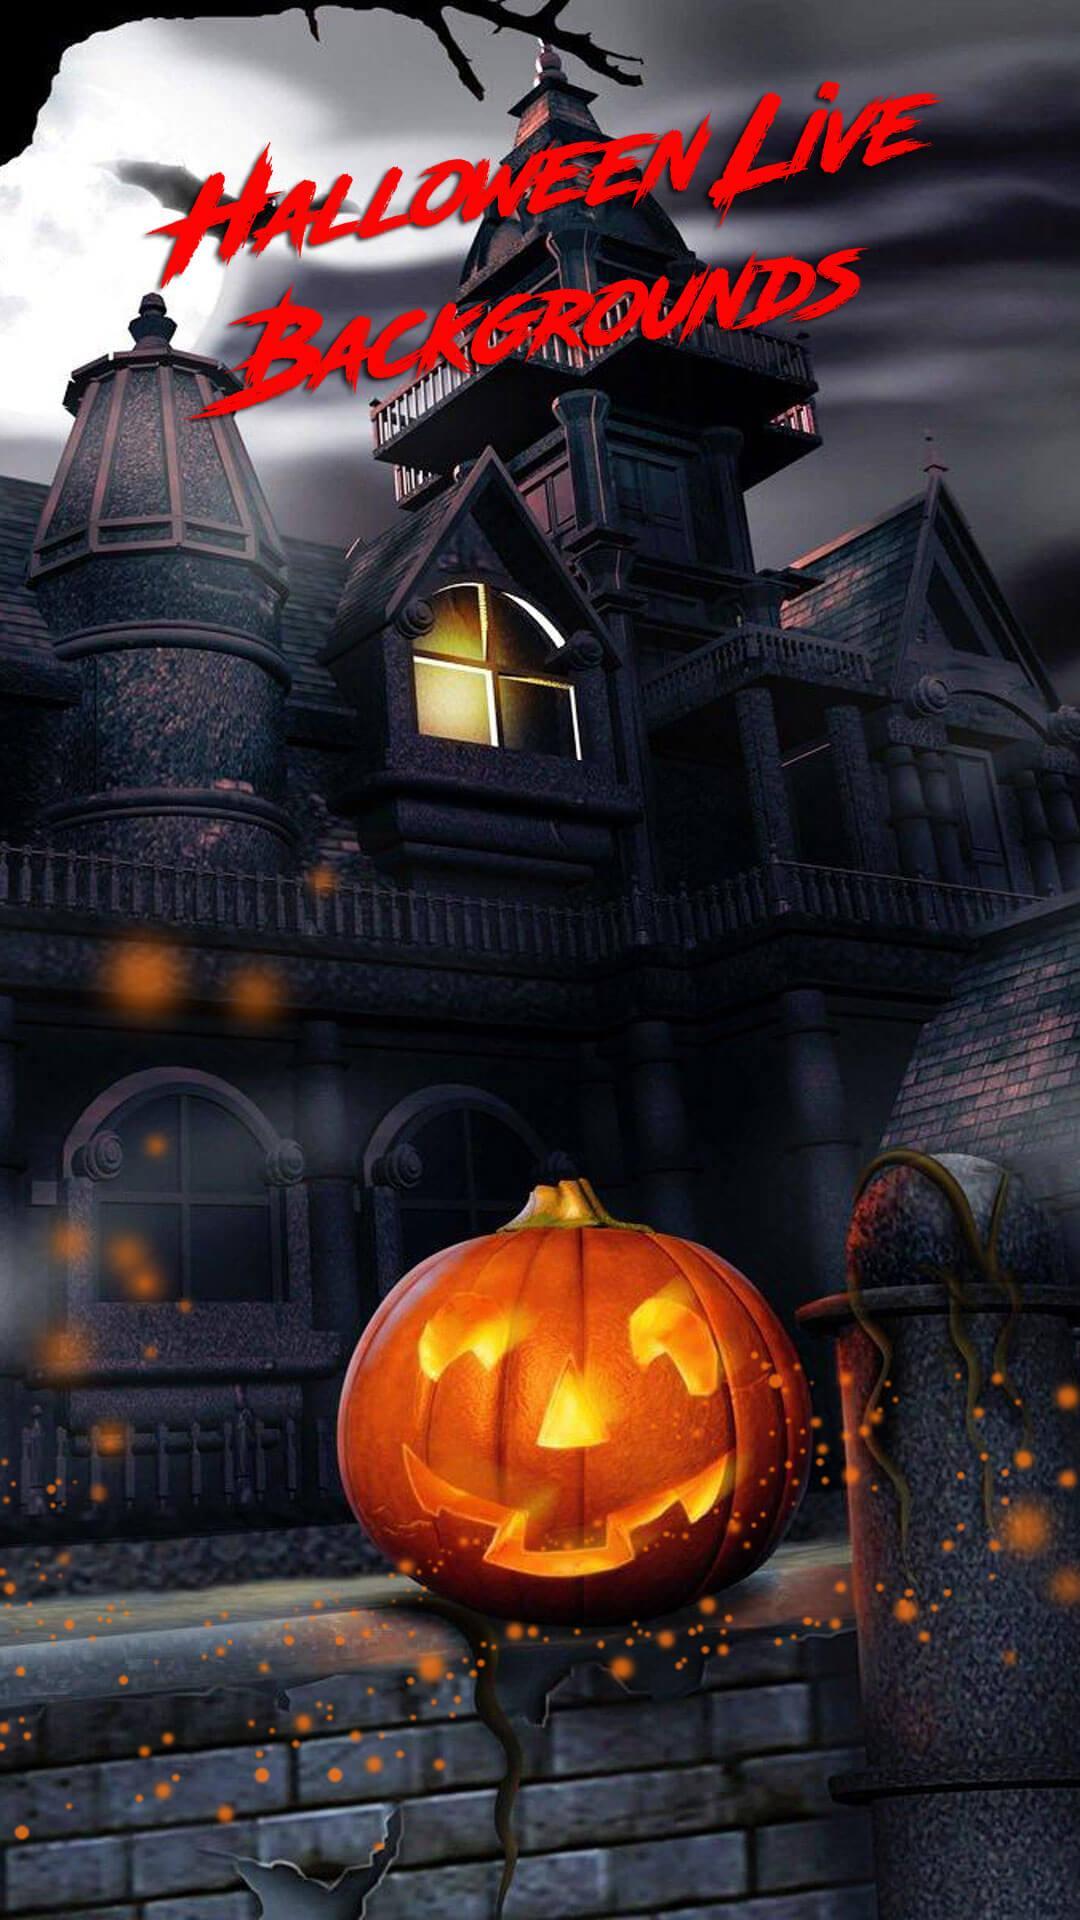 Wallpaper Of Halloween Posted By Sarah Johnson